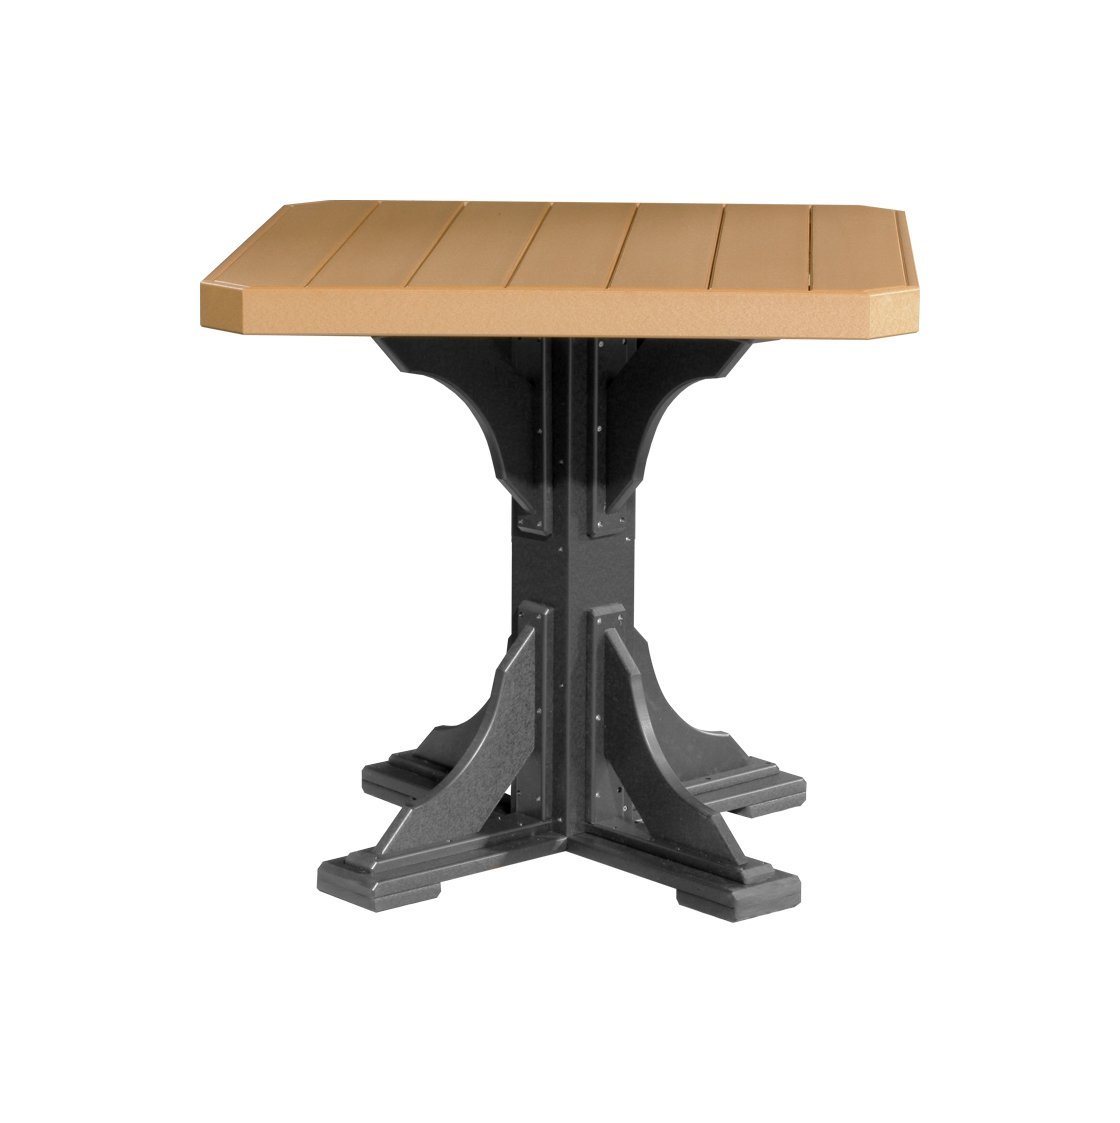 Luxcraft PolyTuf 41" Square Dining Table